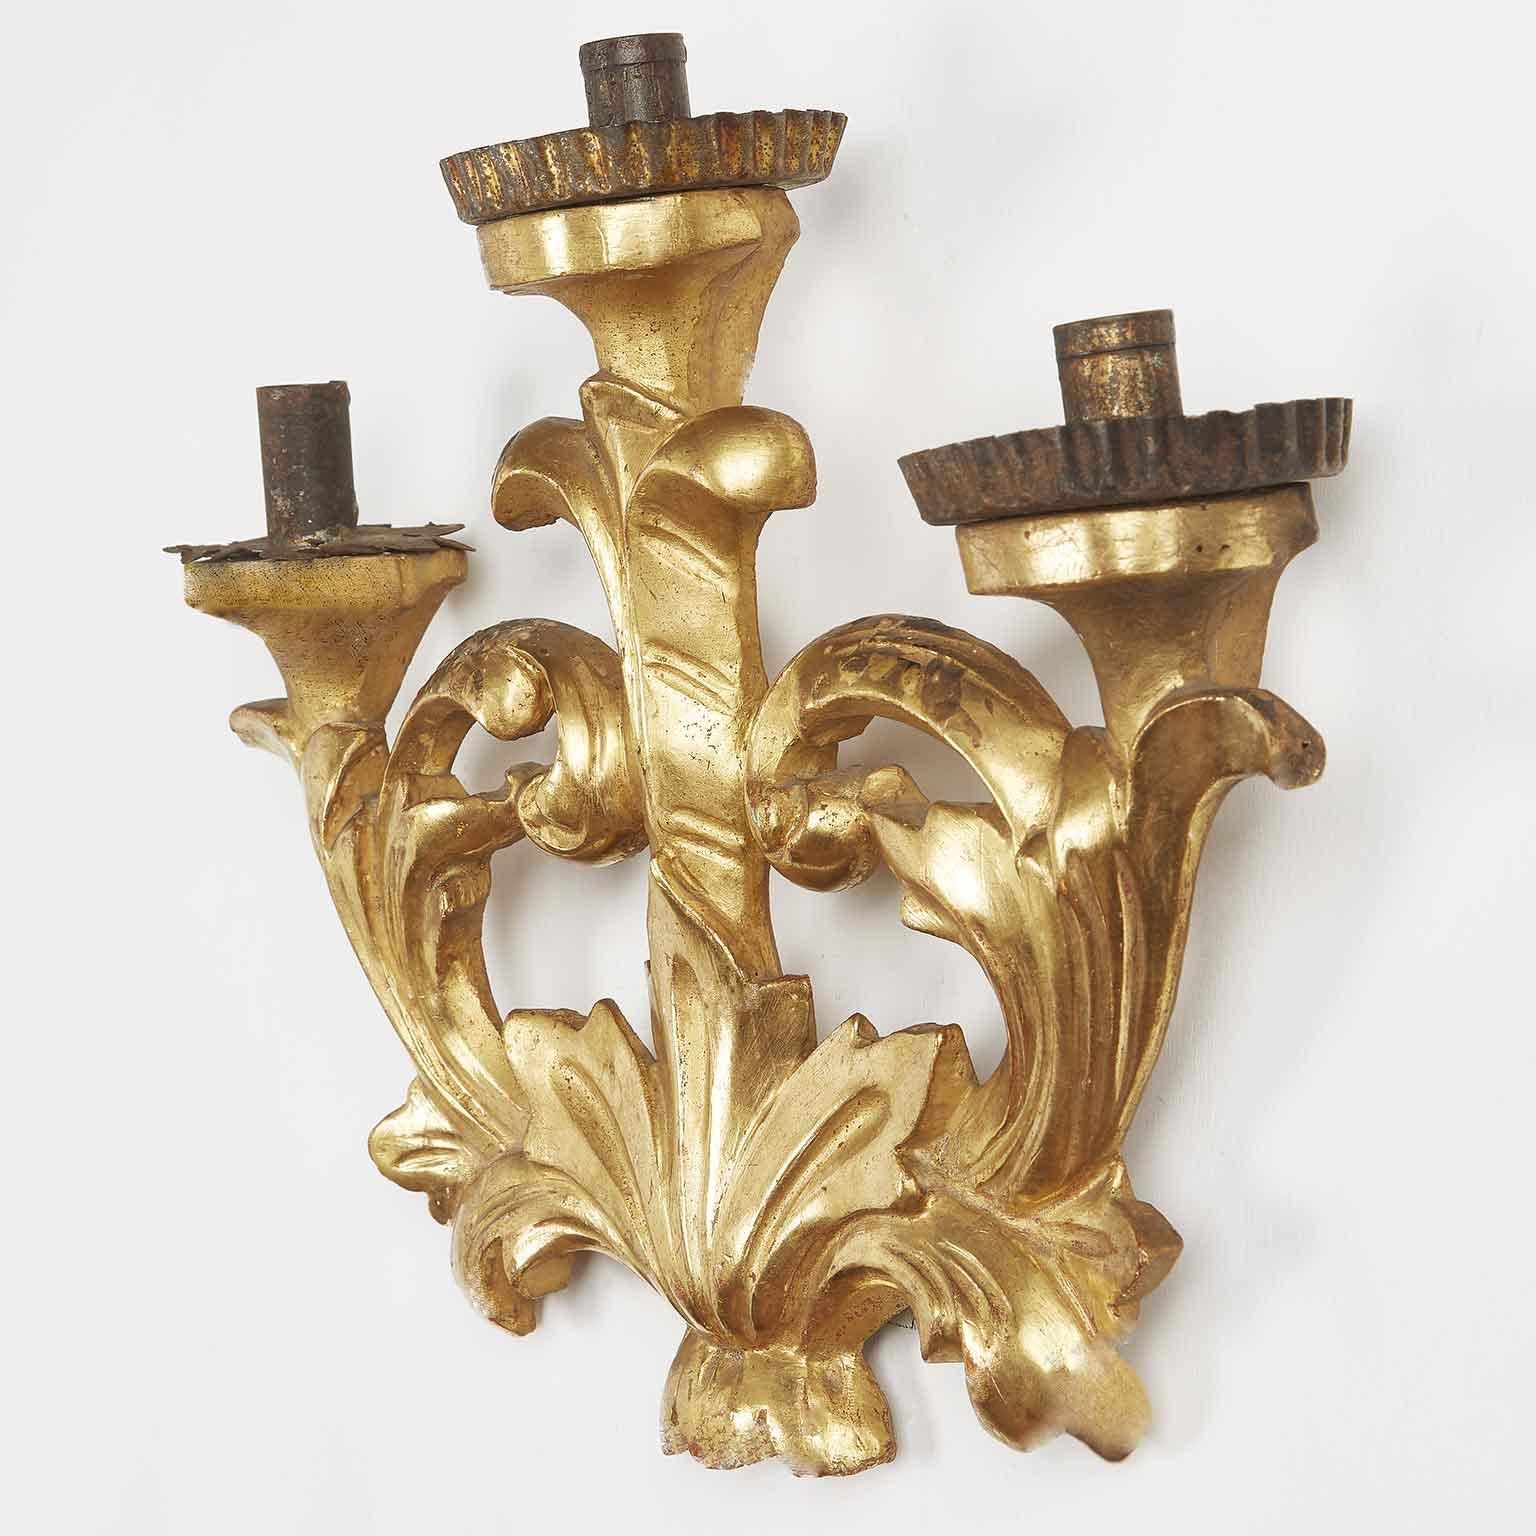 Pair of Italian Baroque Giltwood Wall Candelabra 19th Century Carved Sconces For Sale 1